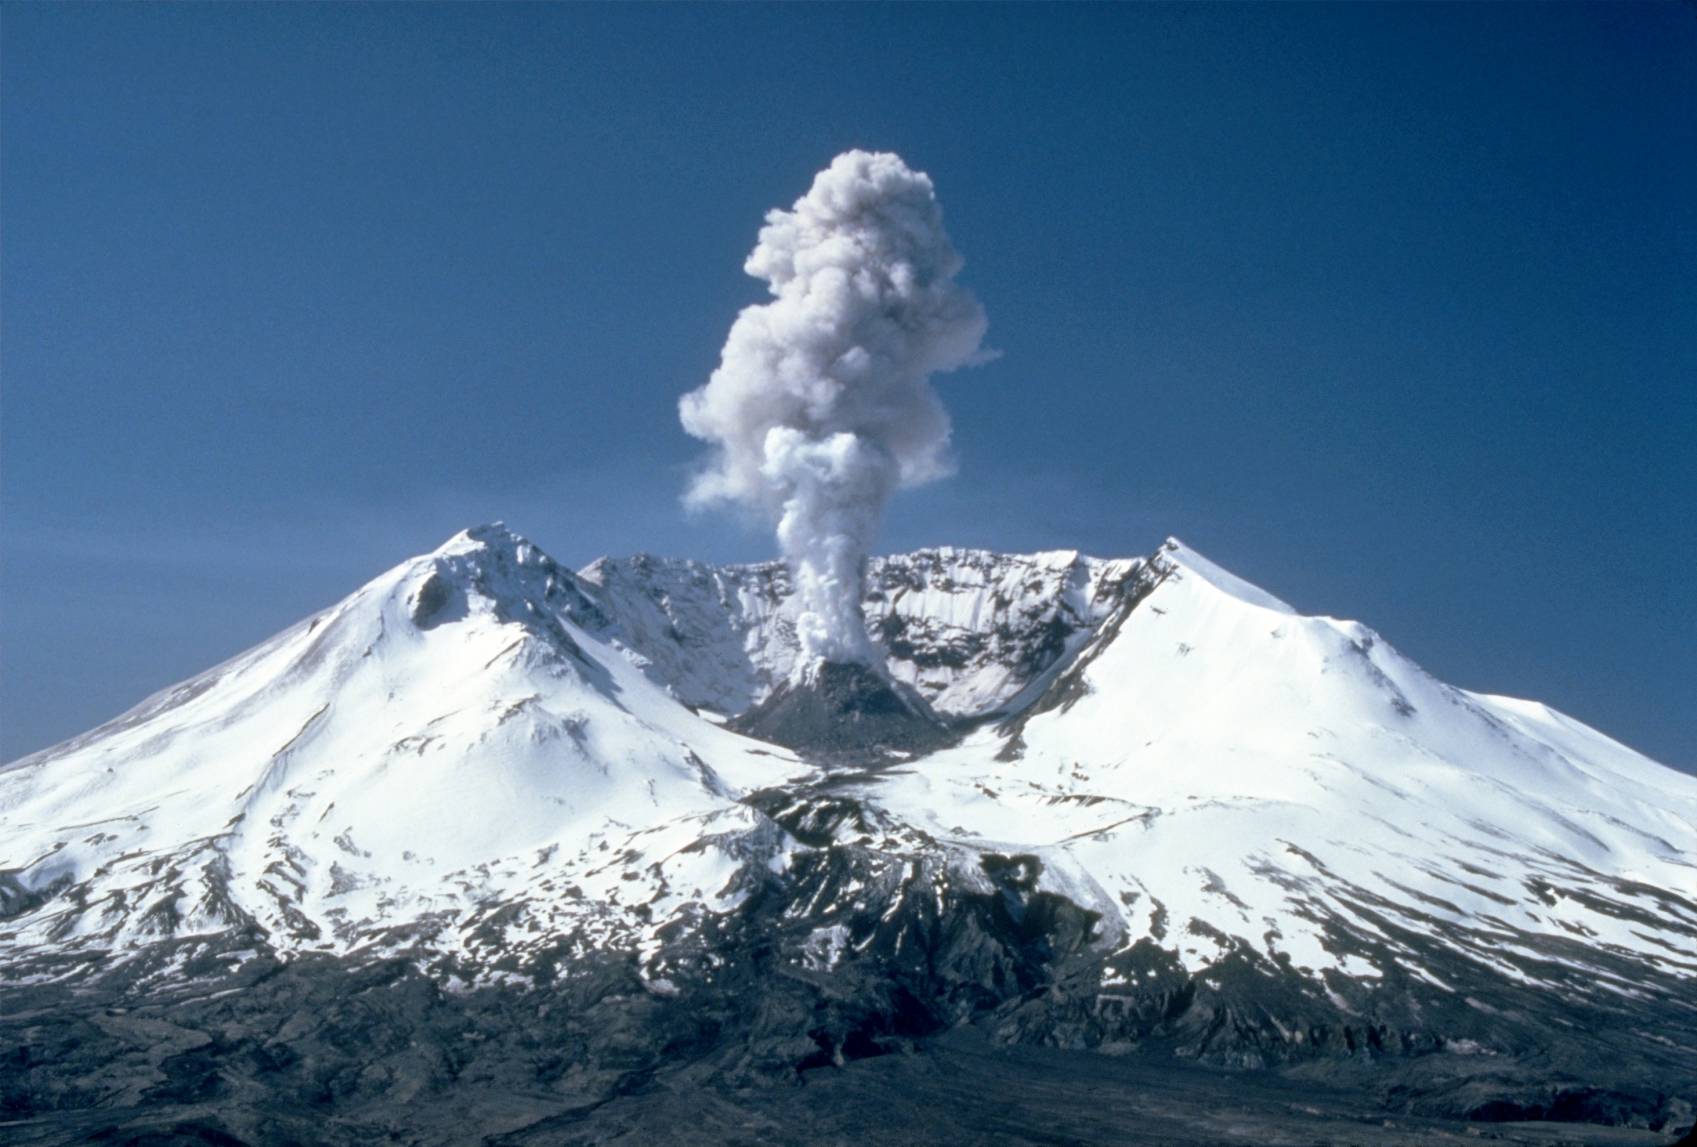 Plumes of steam, gas, and ash often occurred at Mount St. Helens in the early 1980s. On clear days they could be seen from Portland, Oregon, 50 mi (80 km) to the south. The plume photographed here rose nearly 3,000 ft (910 m) above the volcano's rim. The view is from Harrys Ridge, 5 mi (8 km) north of the mountain.